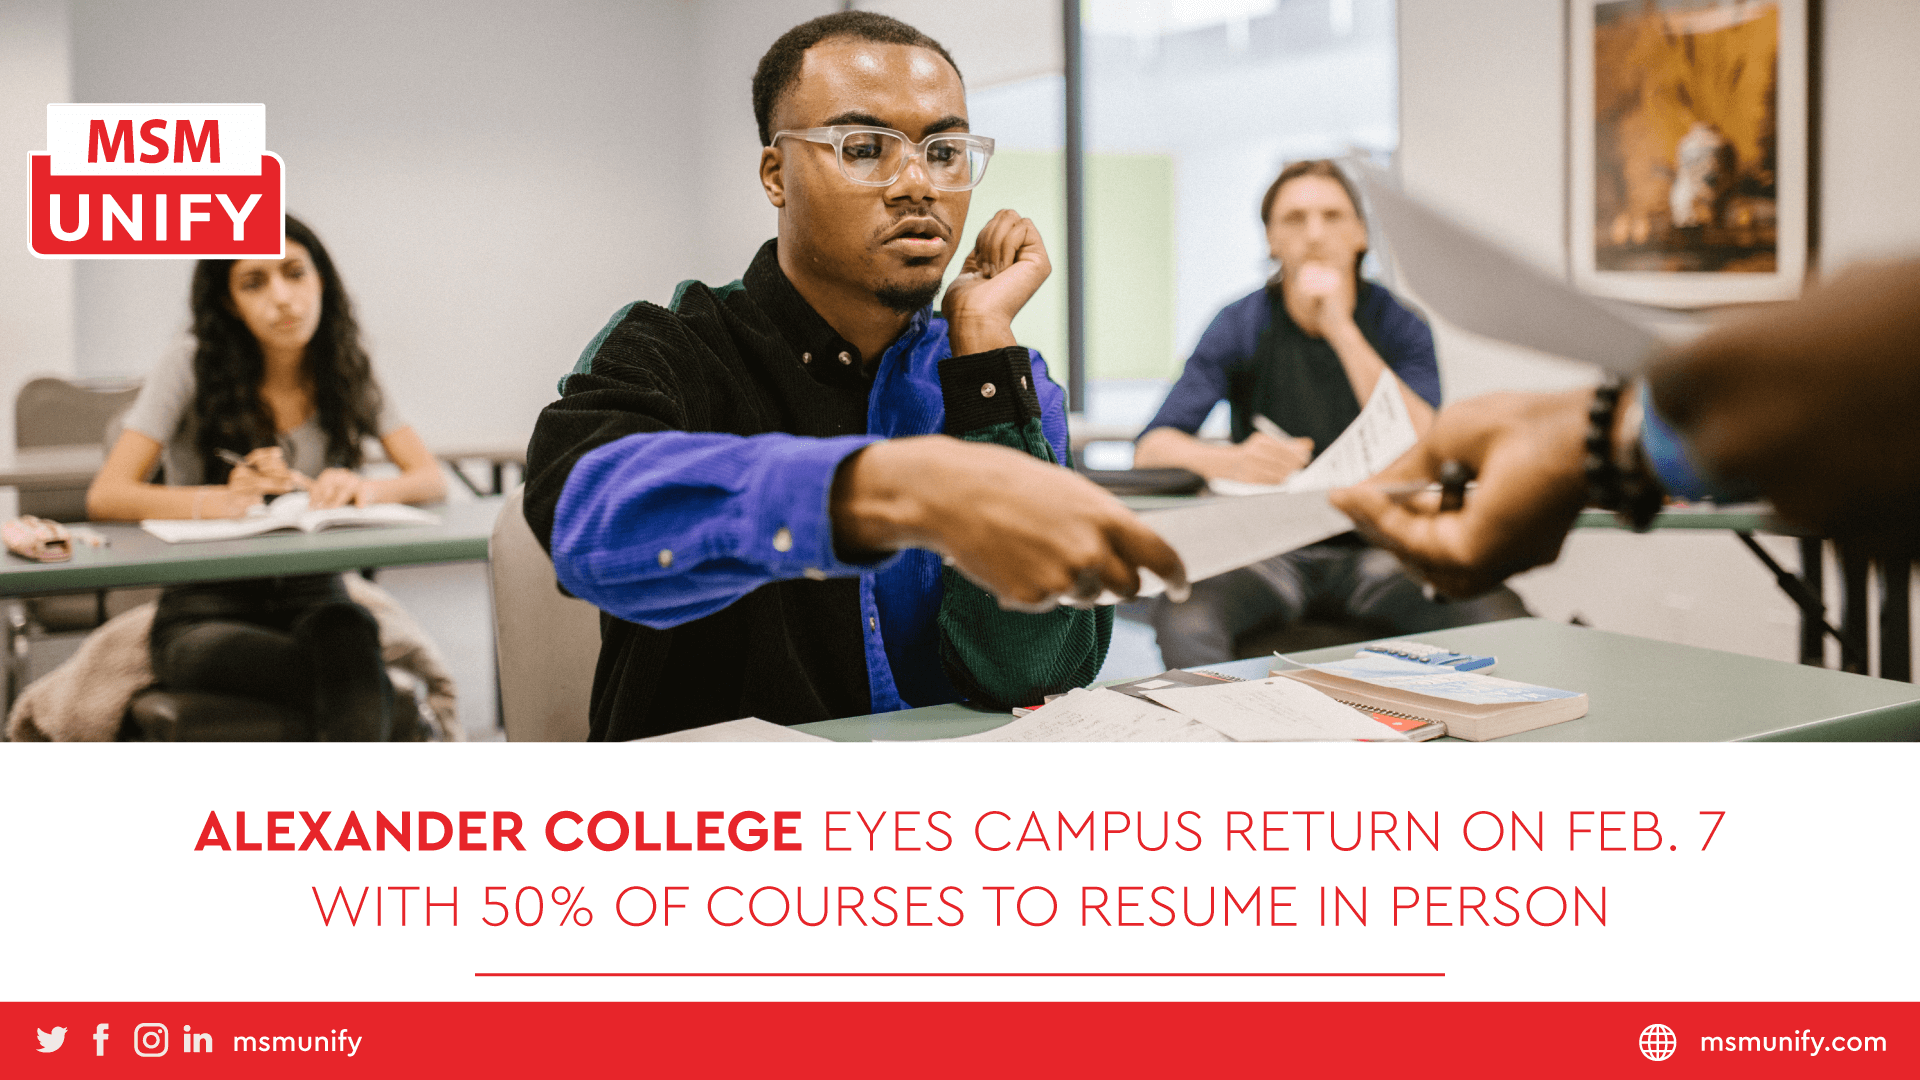 Alexander College Eyes Campus Return on Feb. 7 With 50 of Courses To Resume In Person